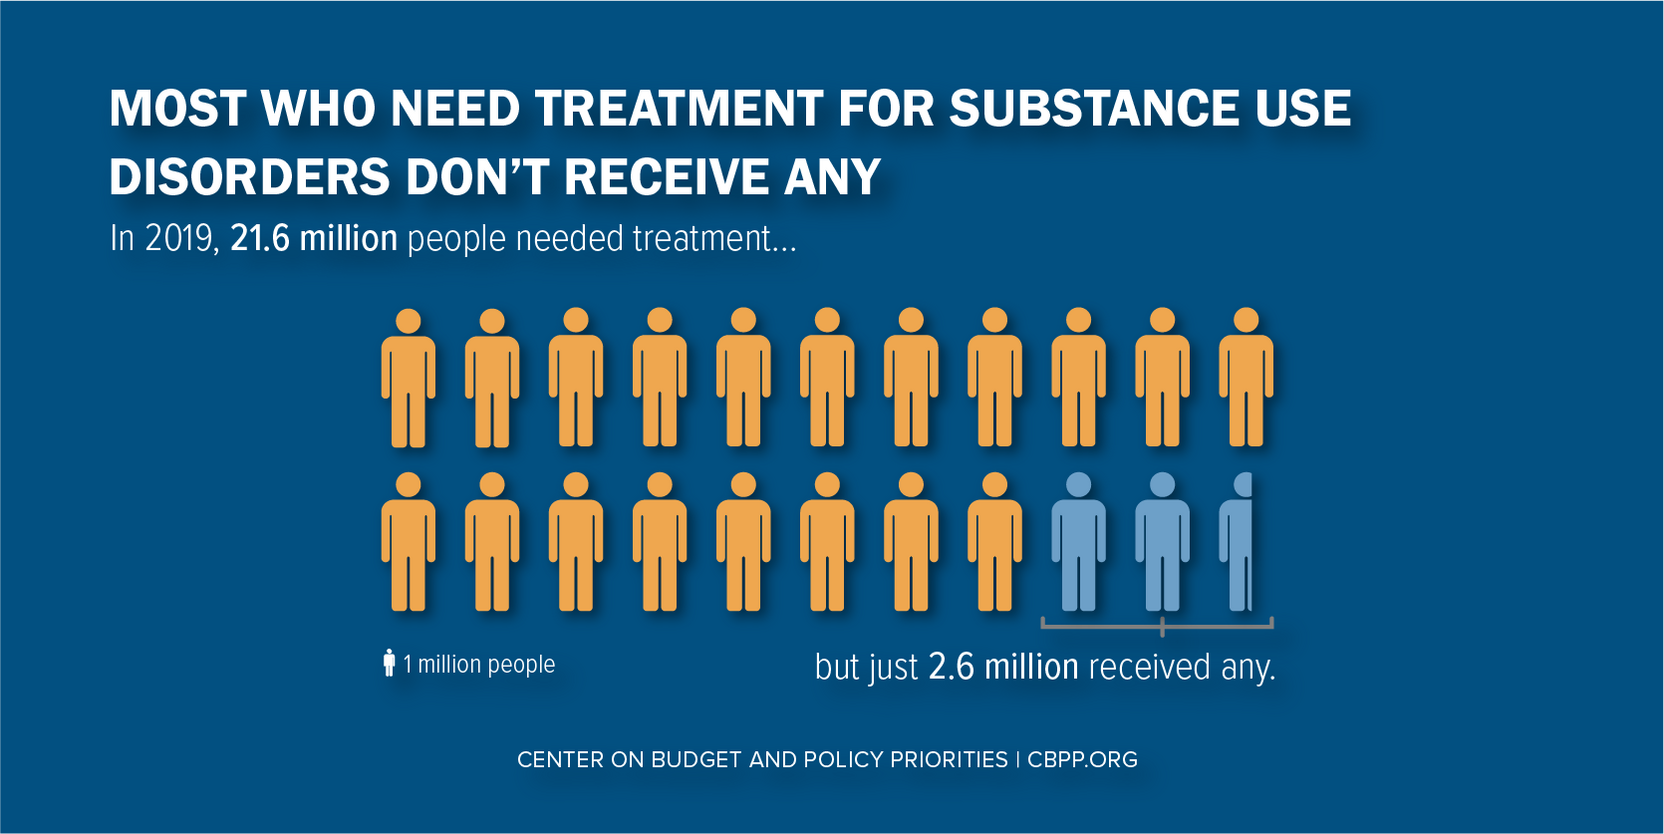 Most Who Need Treatment for Substance Use Disorders Don't Receive Any